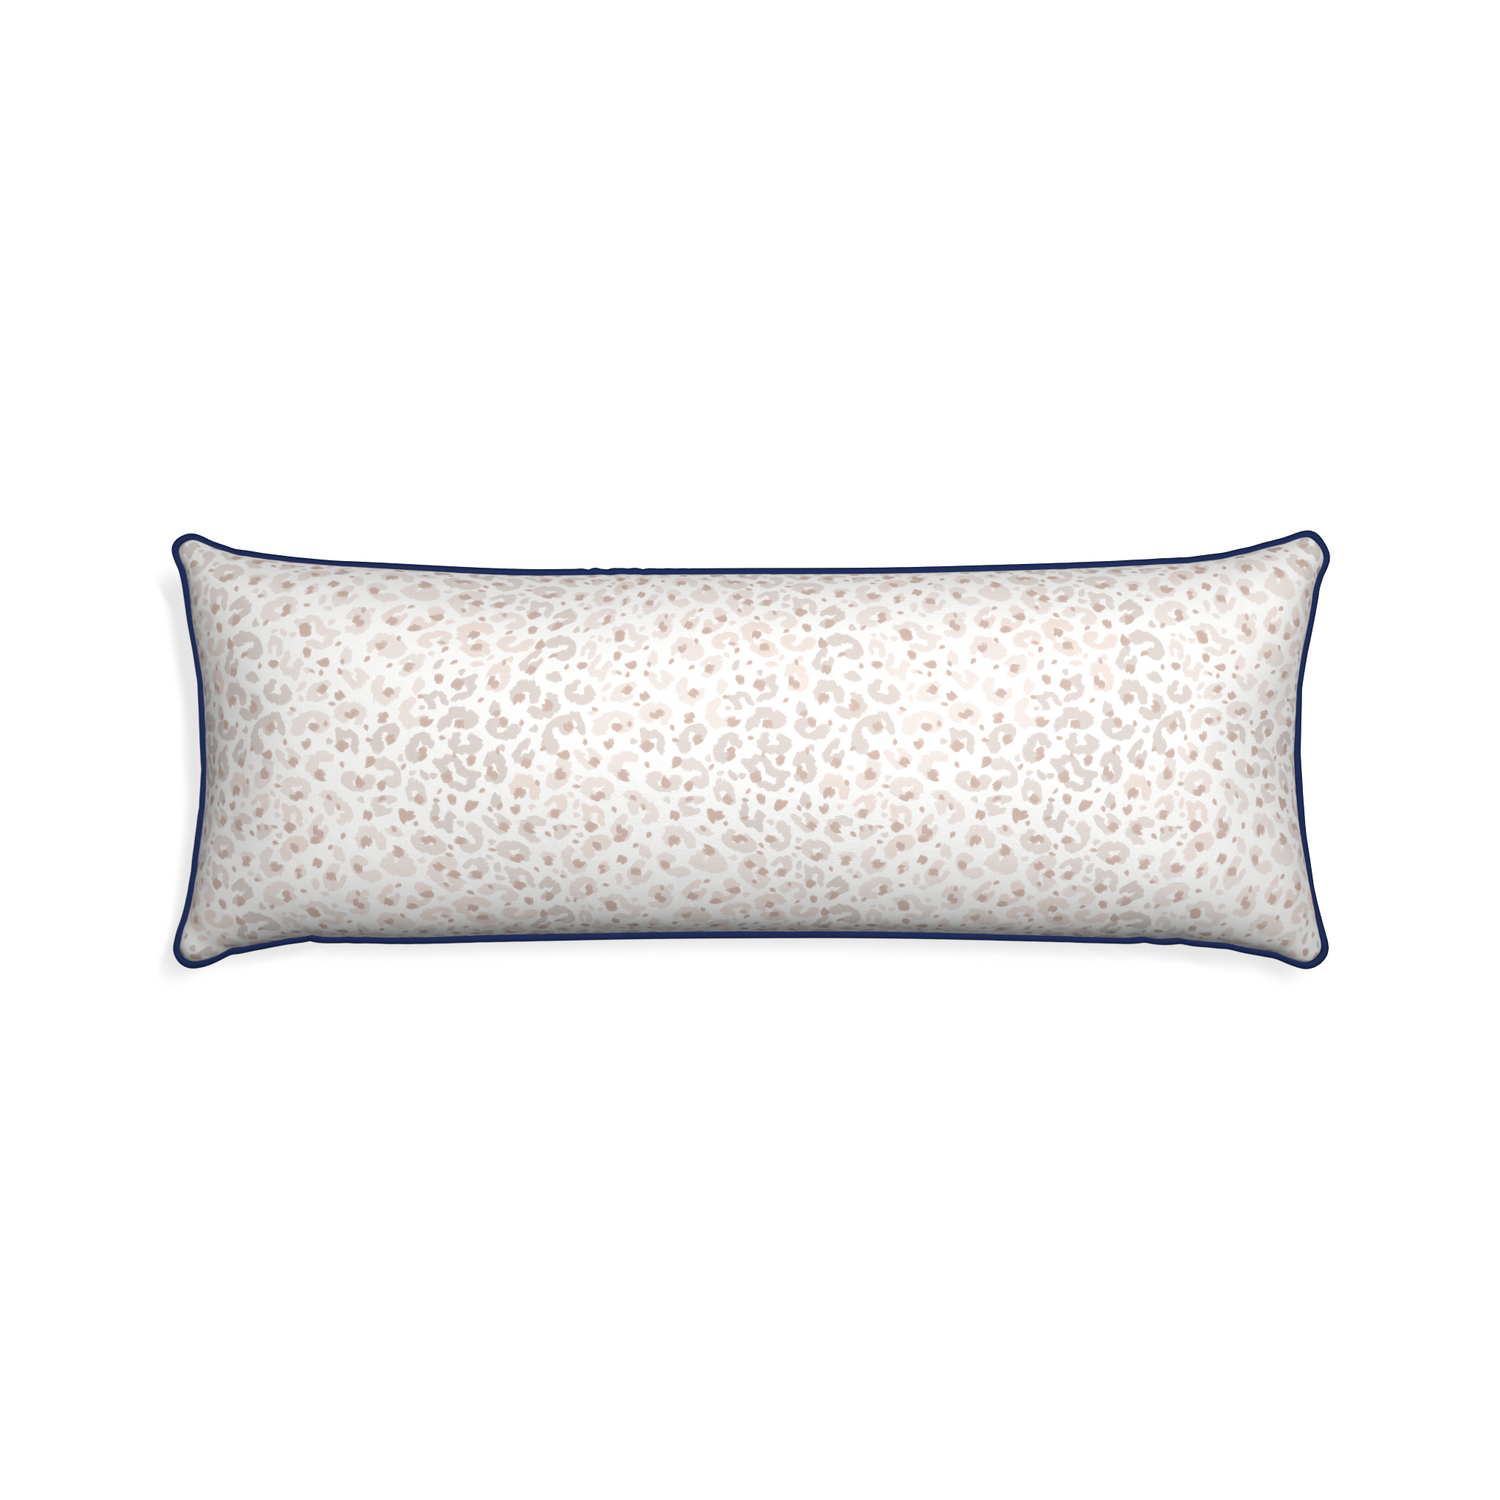 Xl-lumbar rosie custom beige animal printpillow with midnight piping on white background